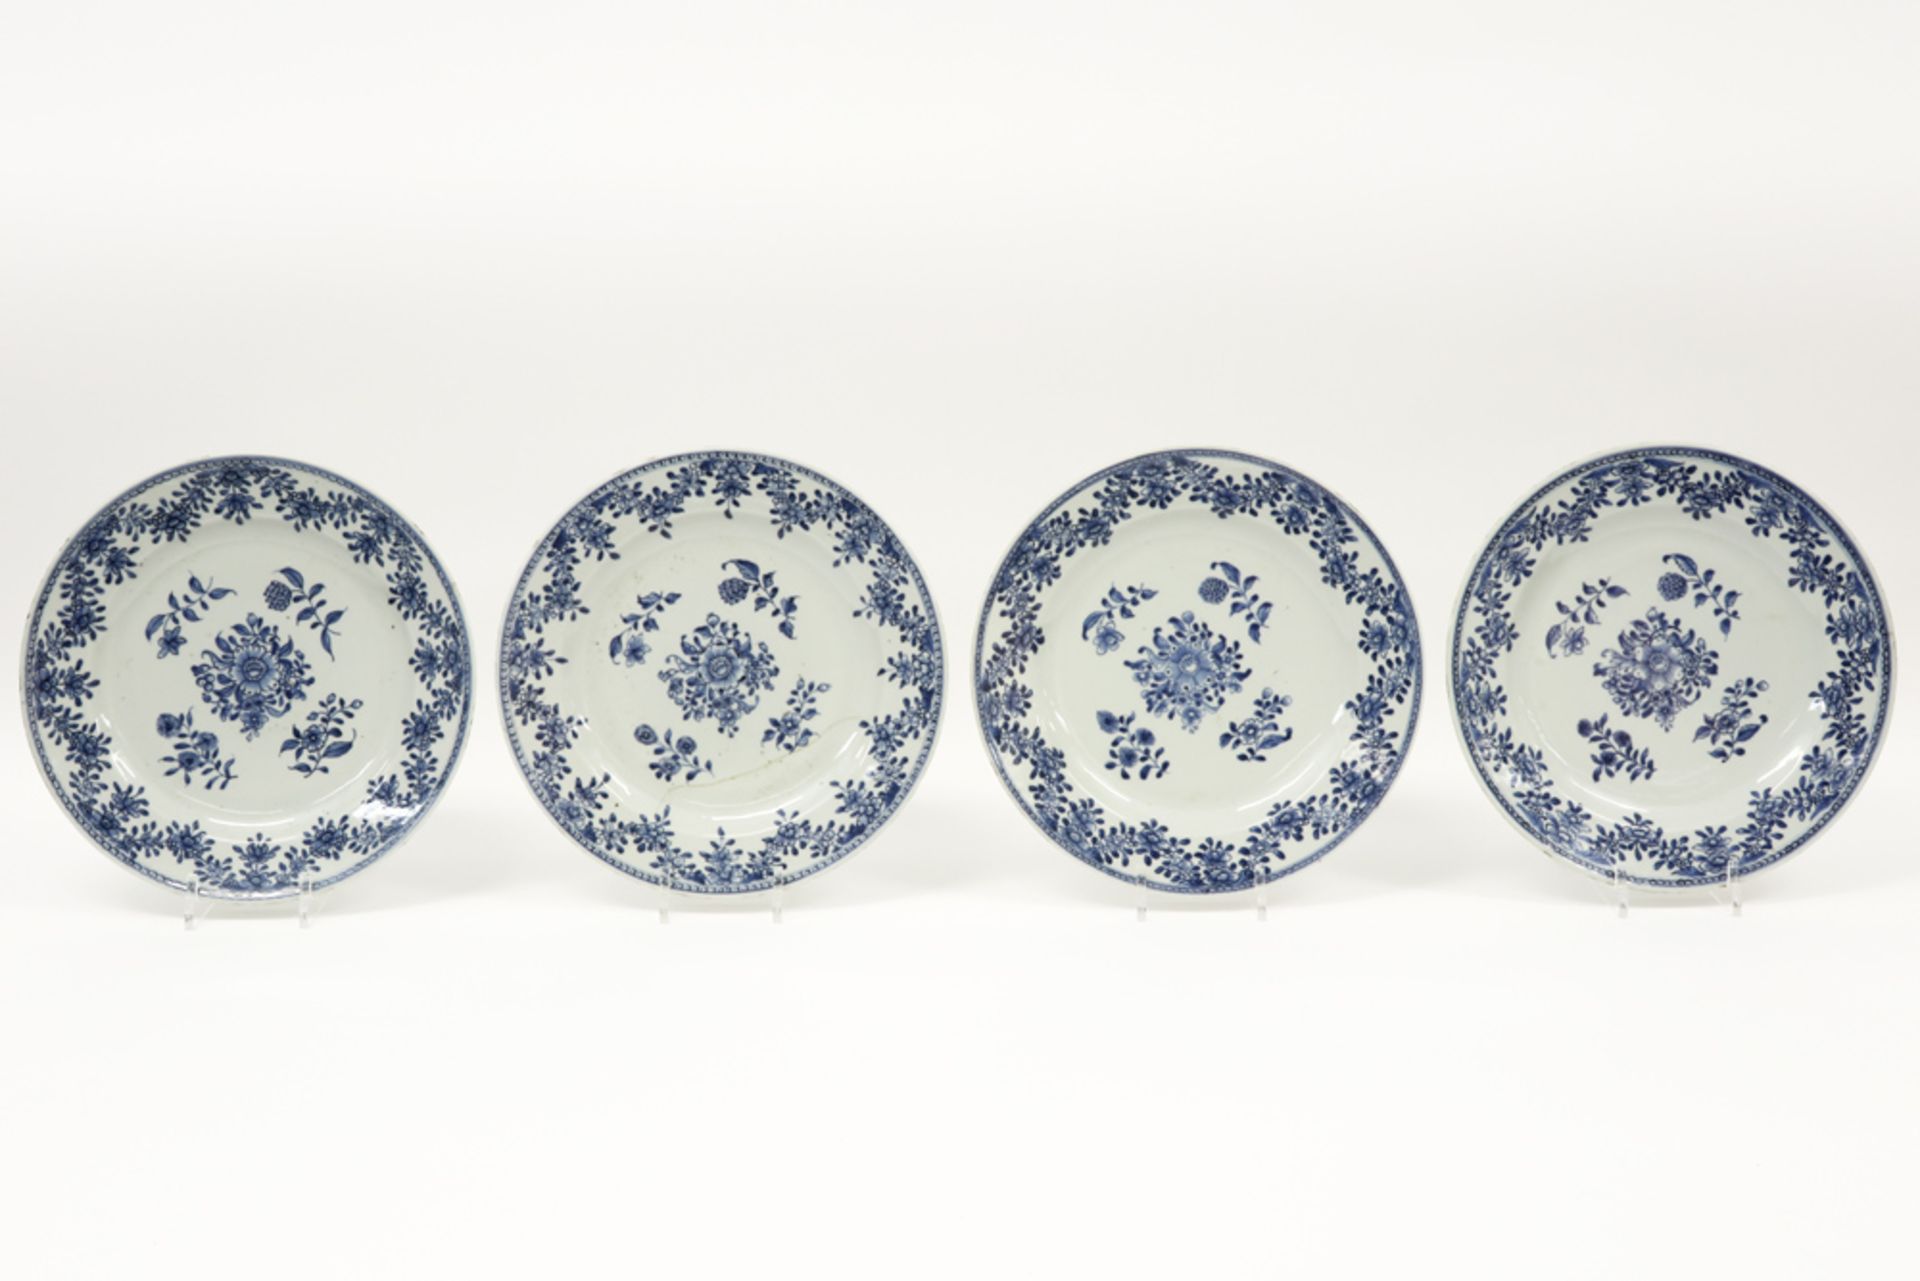 series of four 18th Cent. Chinese plates in porcelain with floral blue-white decor || Serie van vier